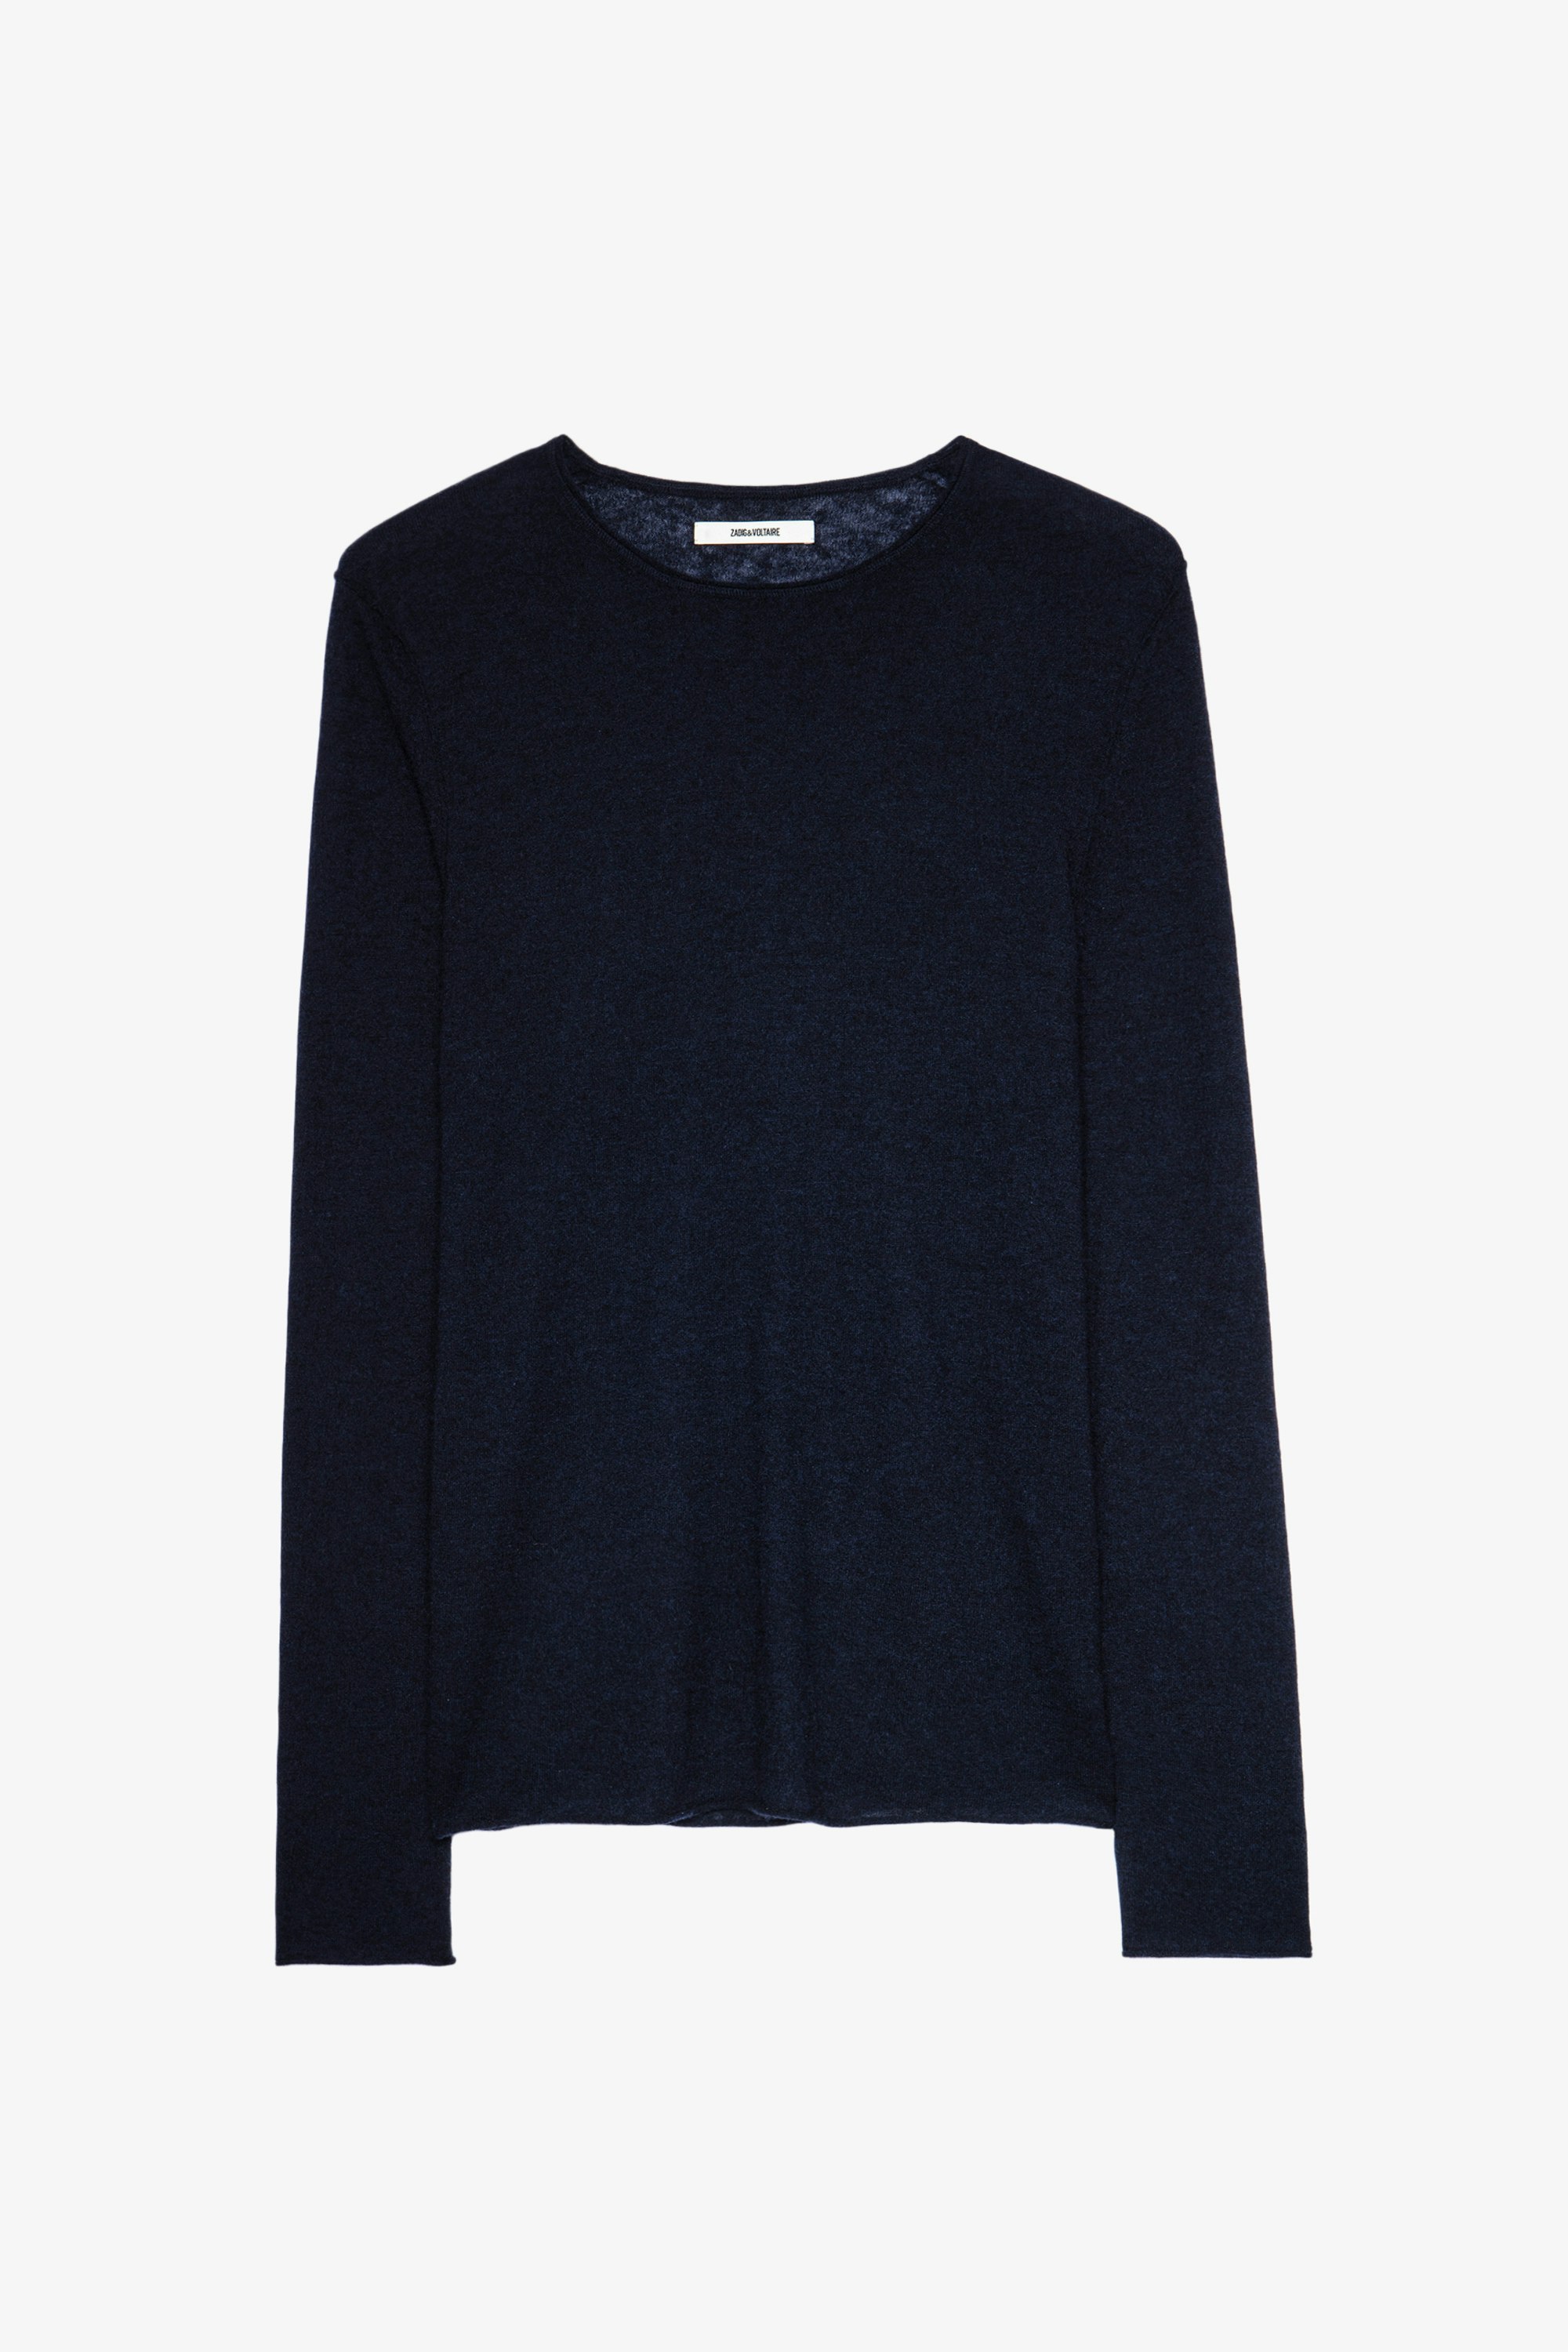 Teiss Cachemire Sweater - Men’s navy blue feather cashmere sweater.